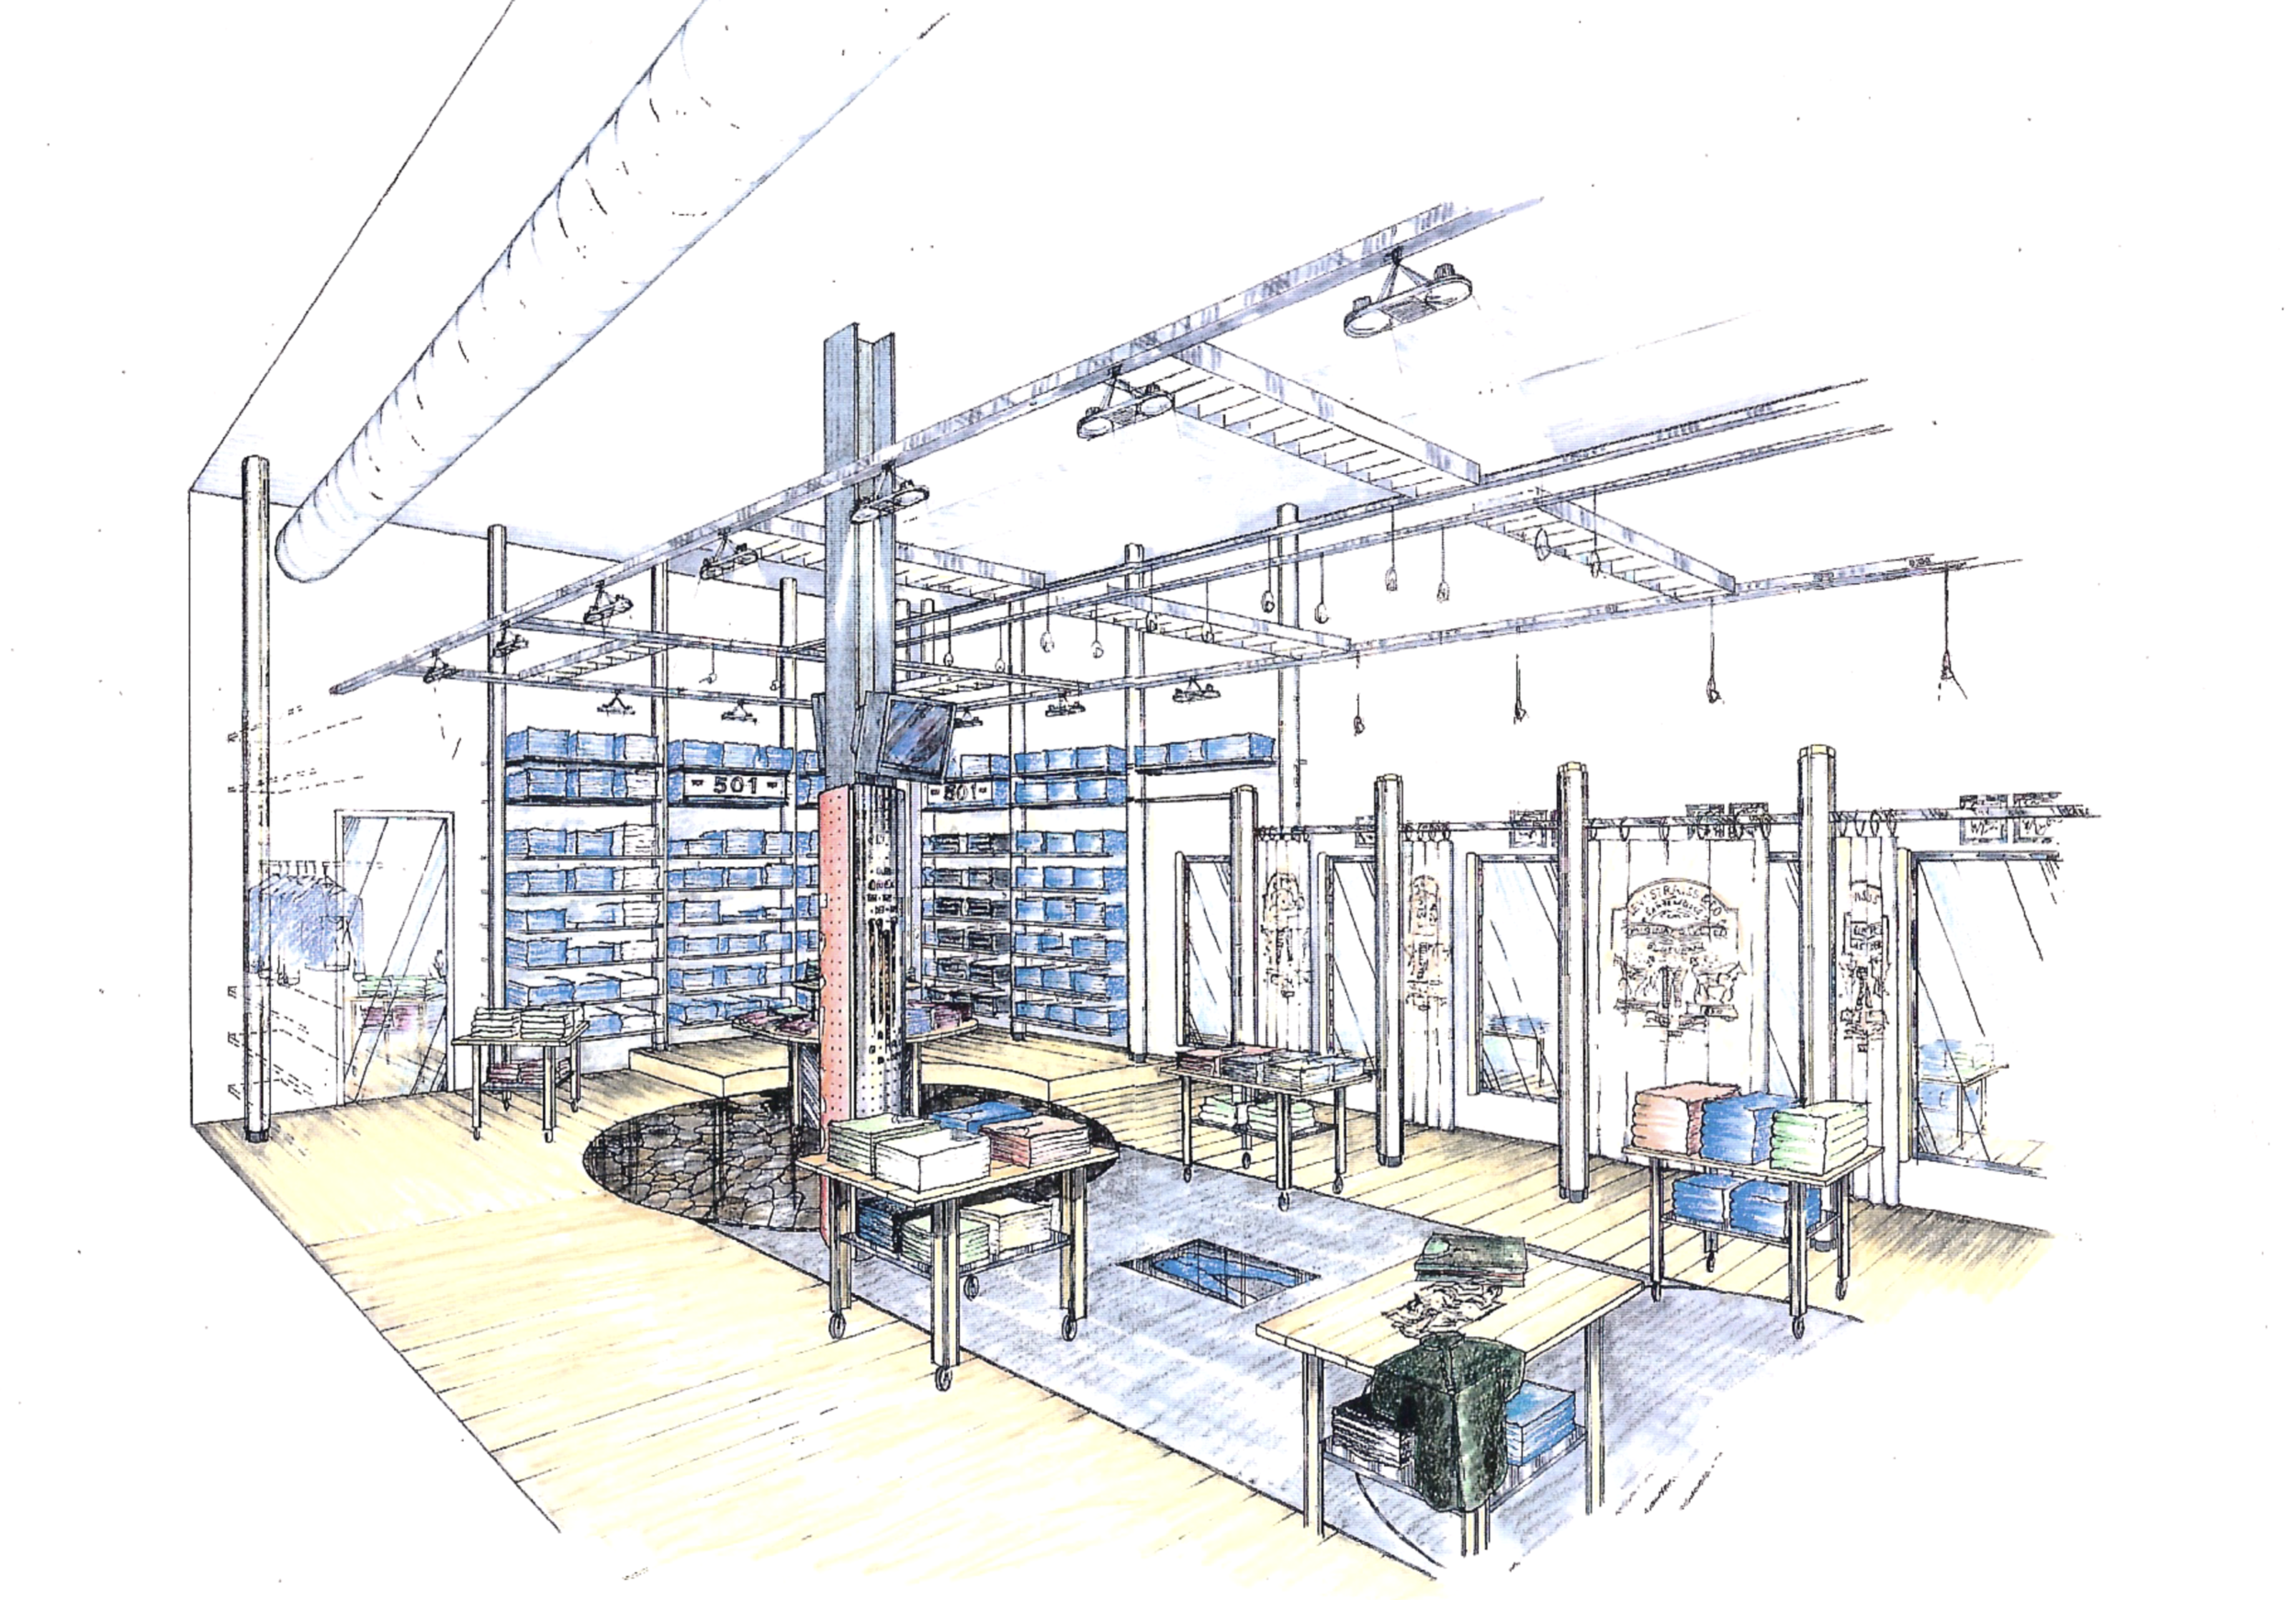  Concept rendering for Nordic Levi’s Stores re-building 